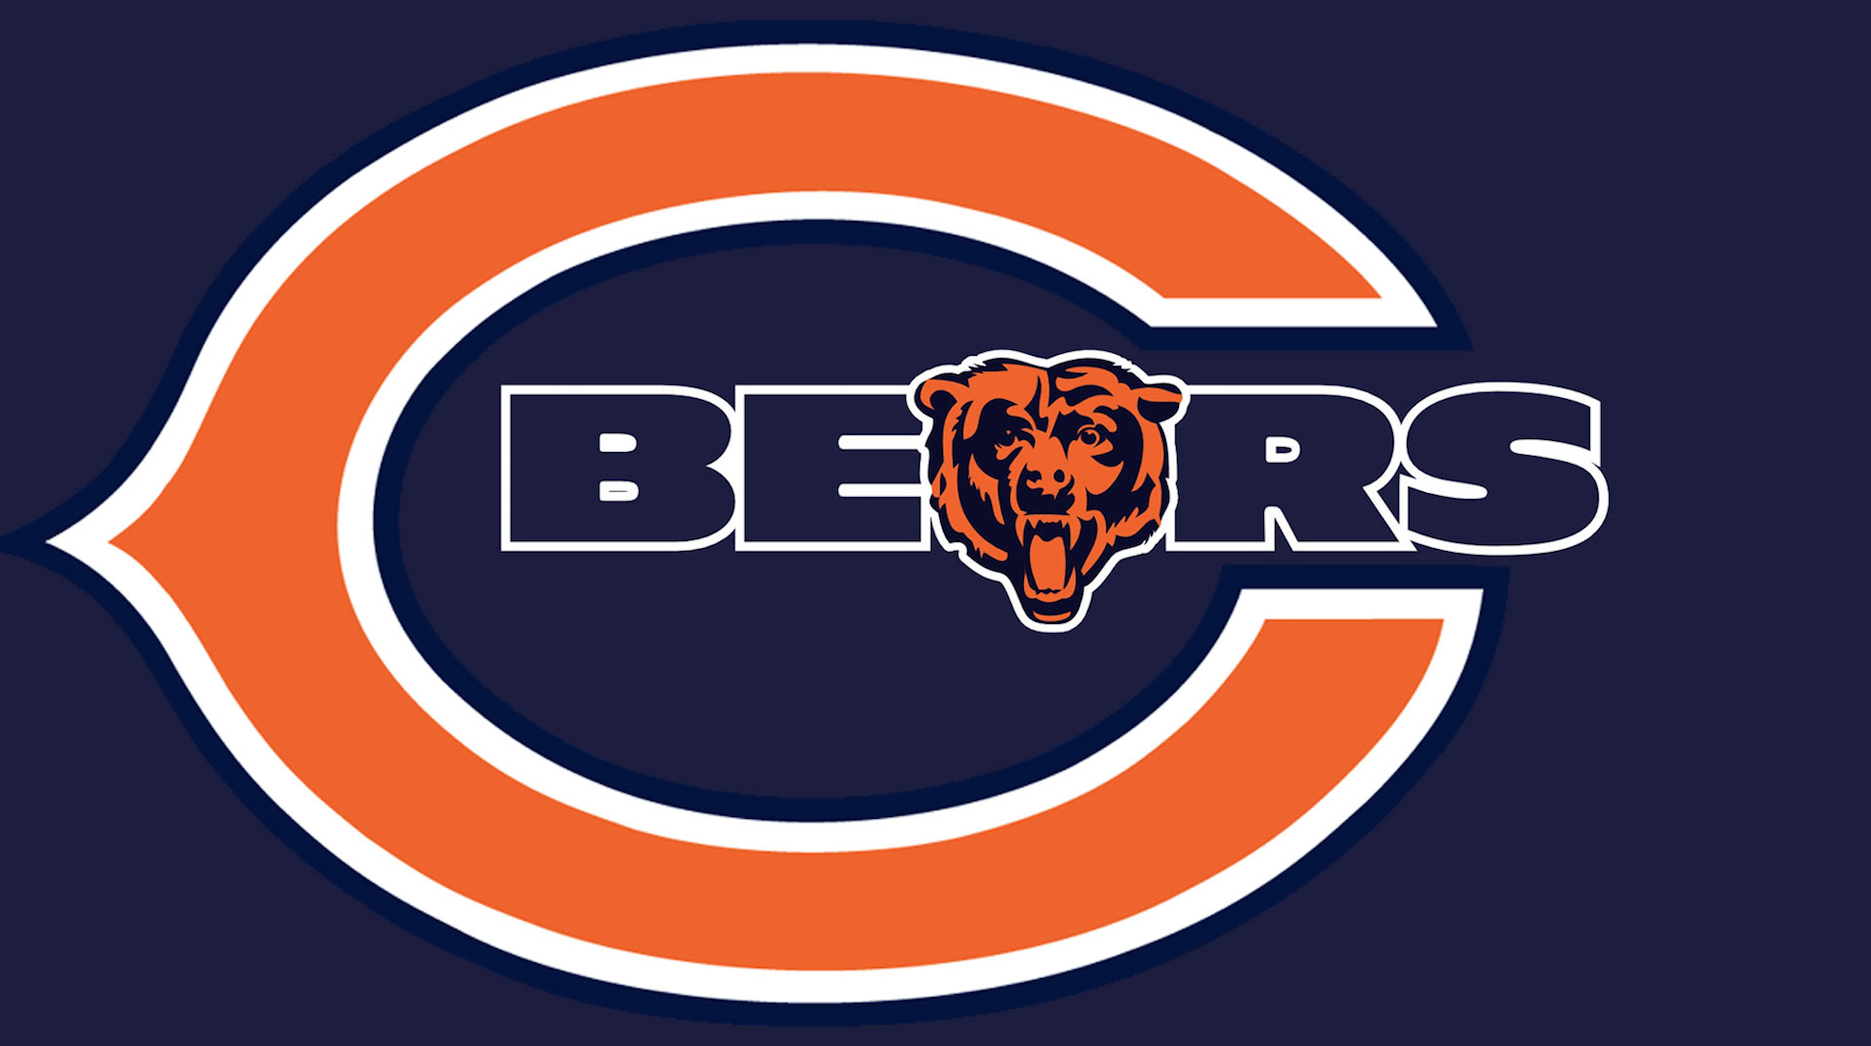 Chicago Bears Logo PNG - 176344